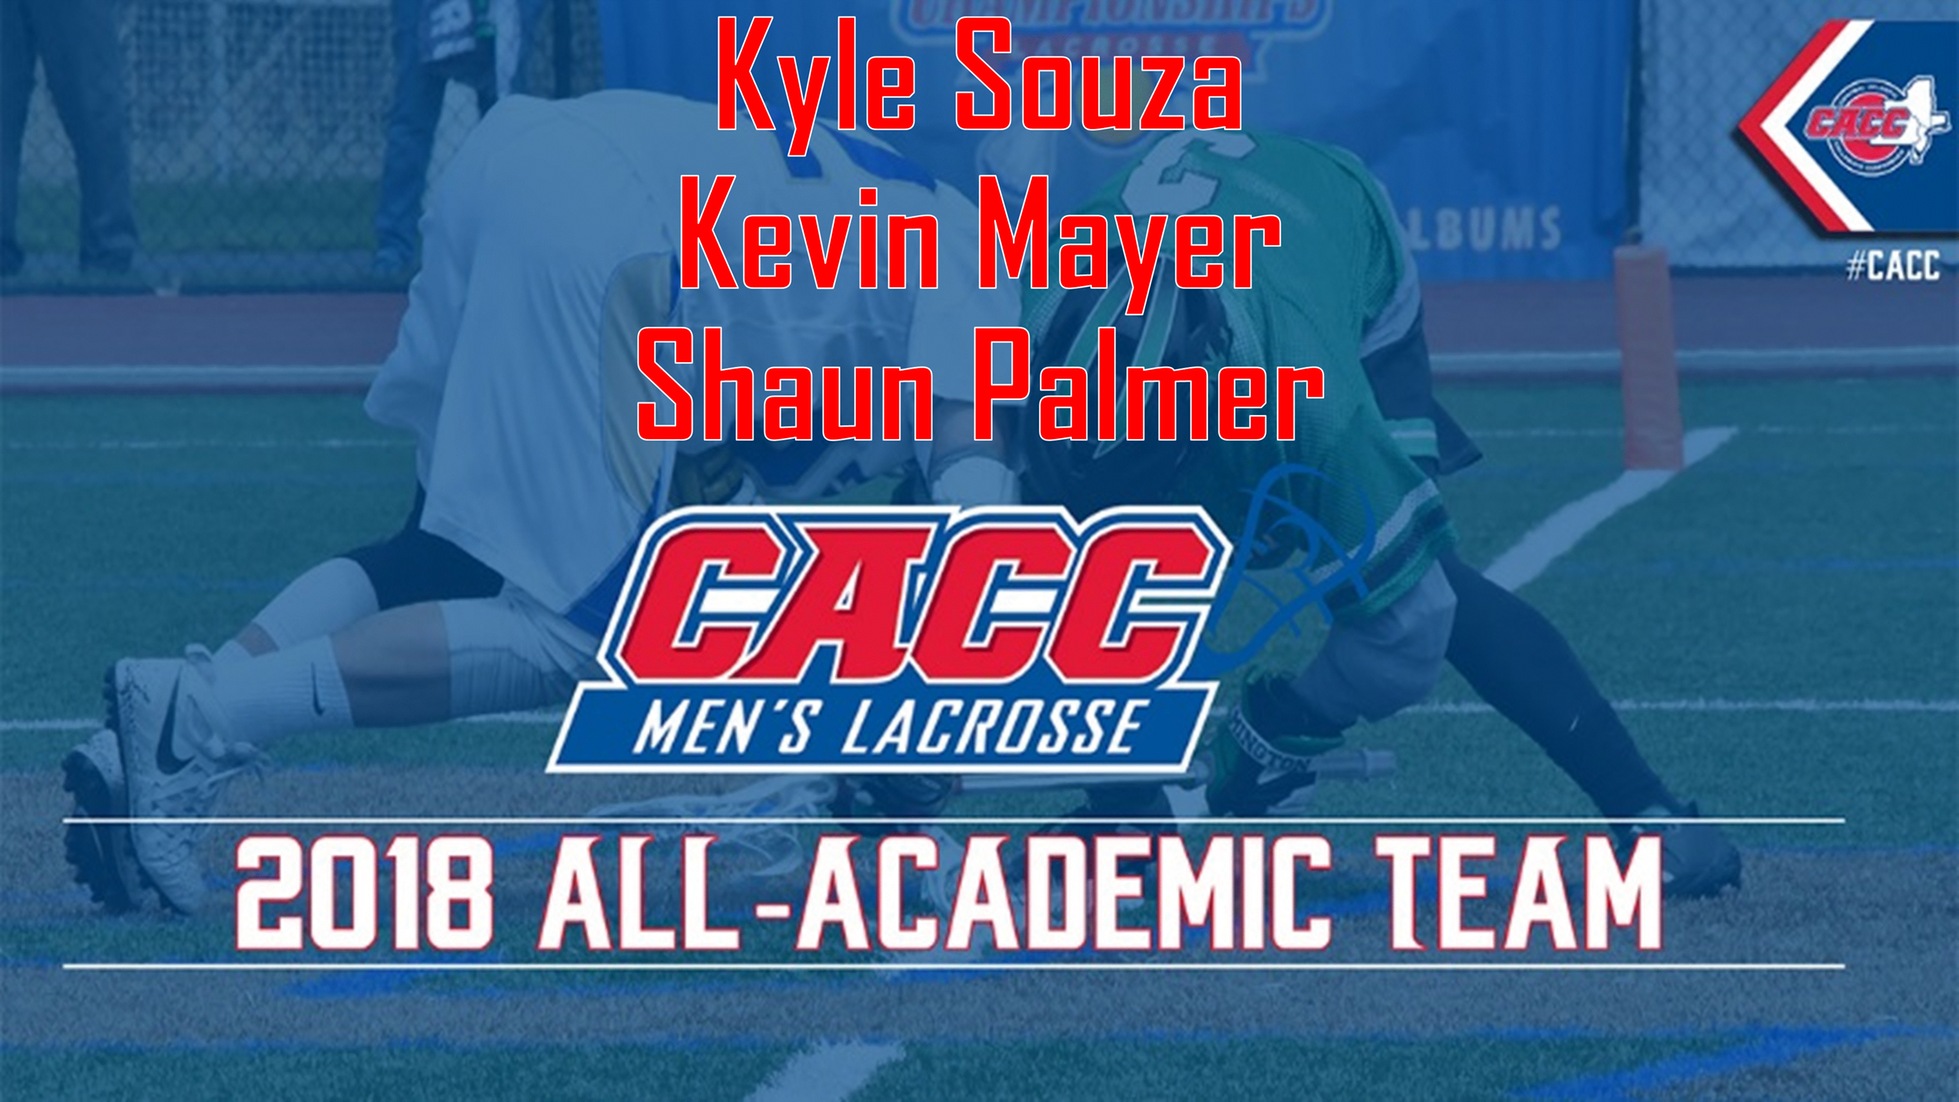 The CACC Released the 2018 CACC All-Academic Men's Lacrosse Team.